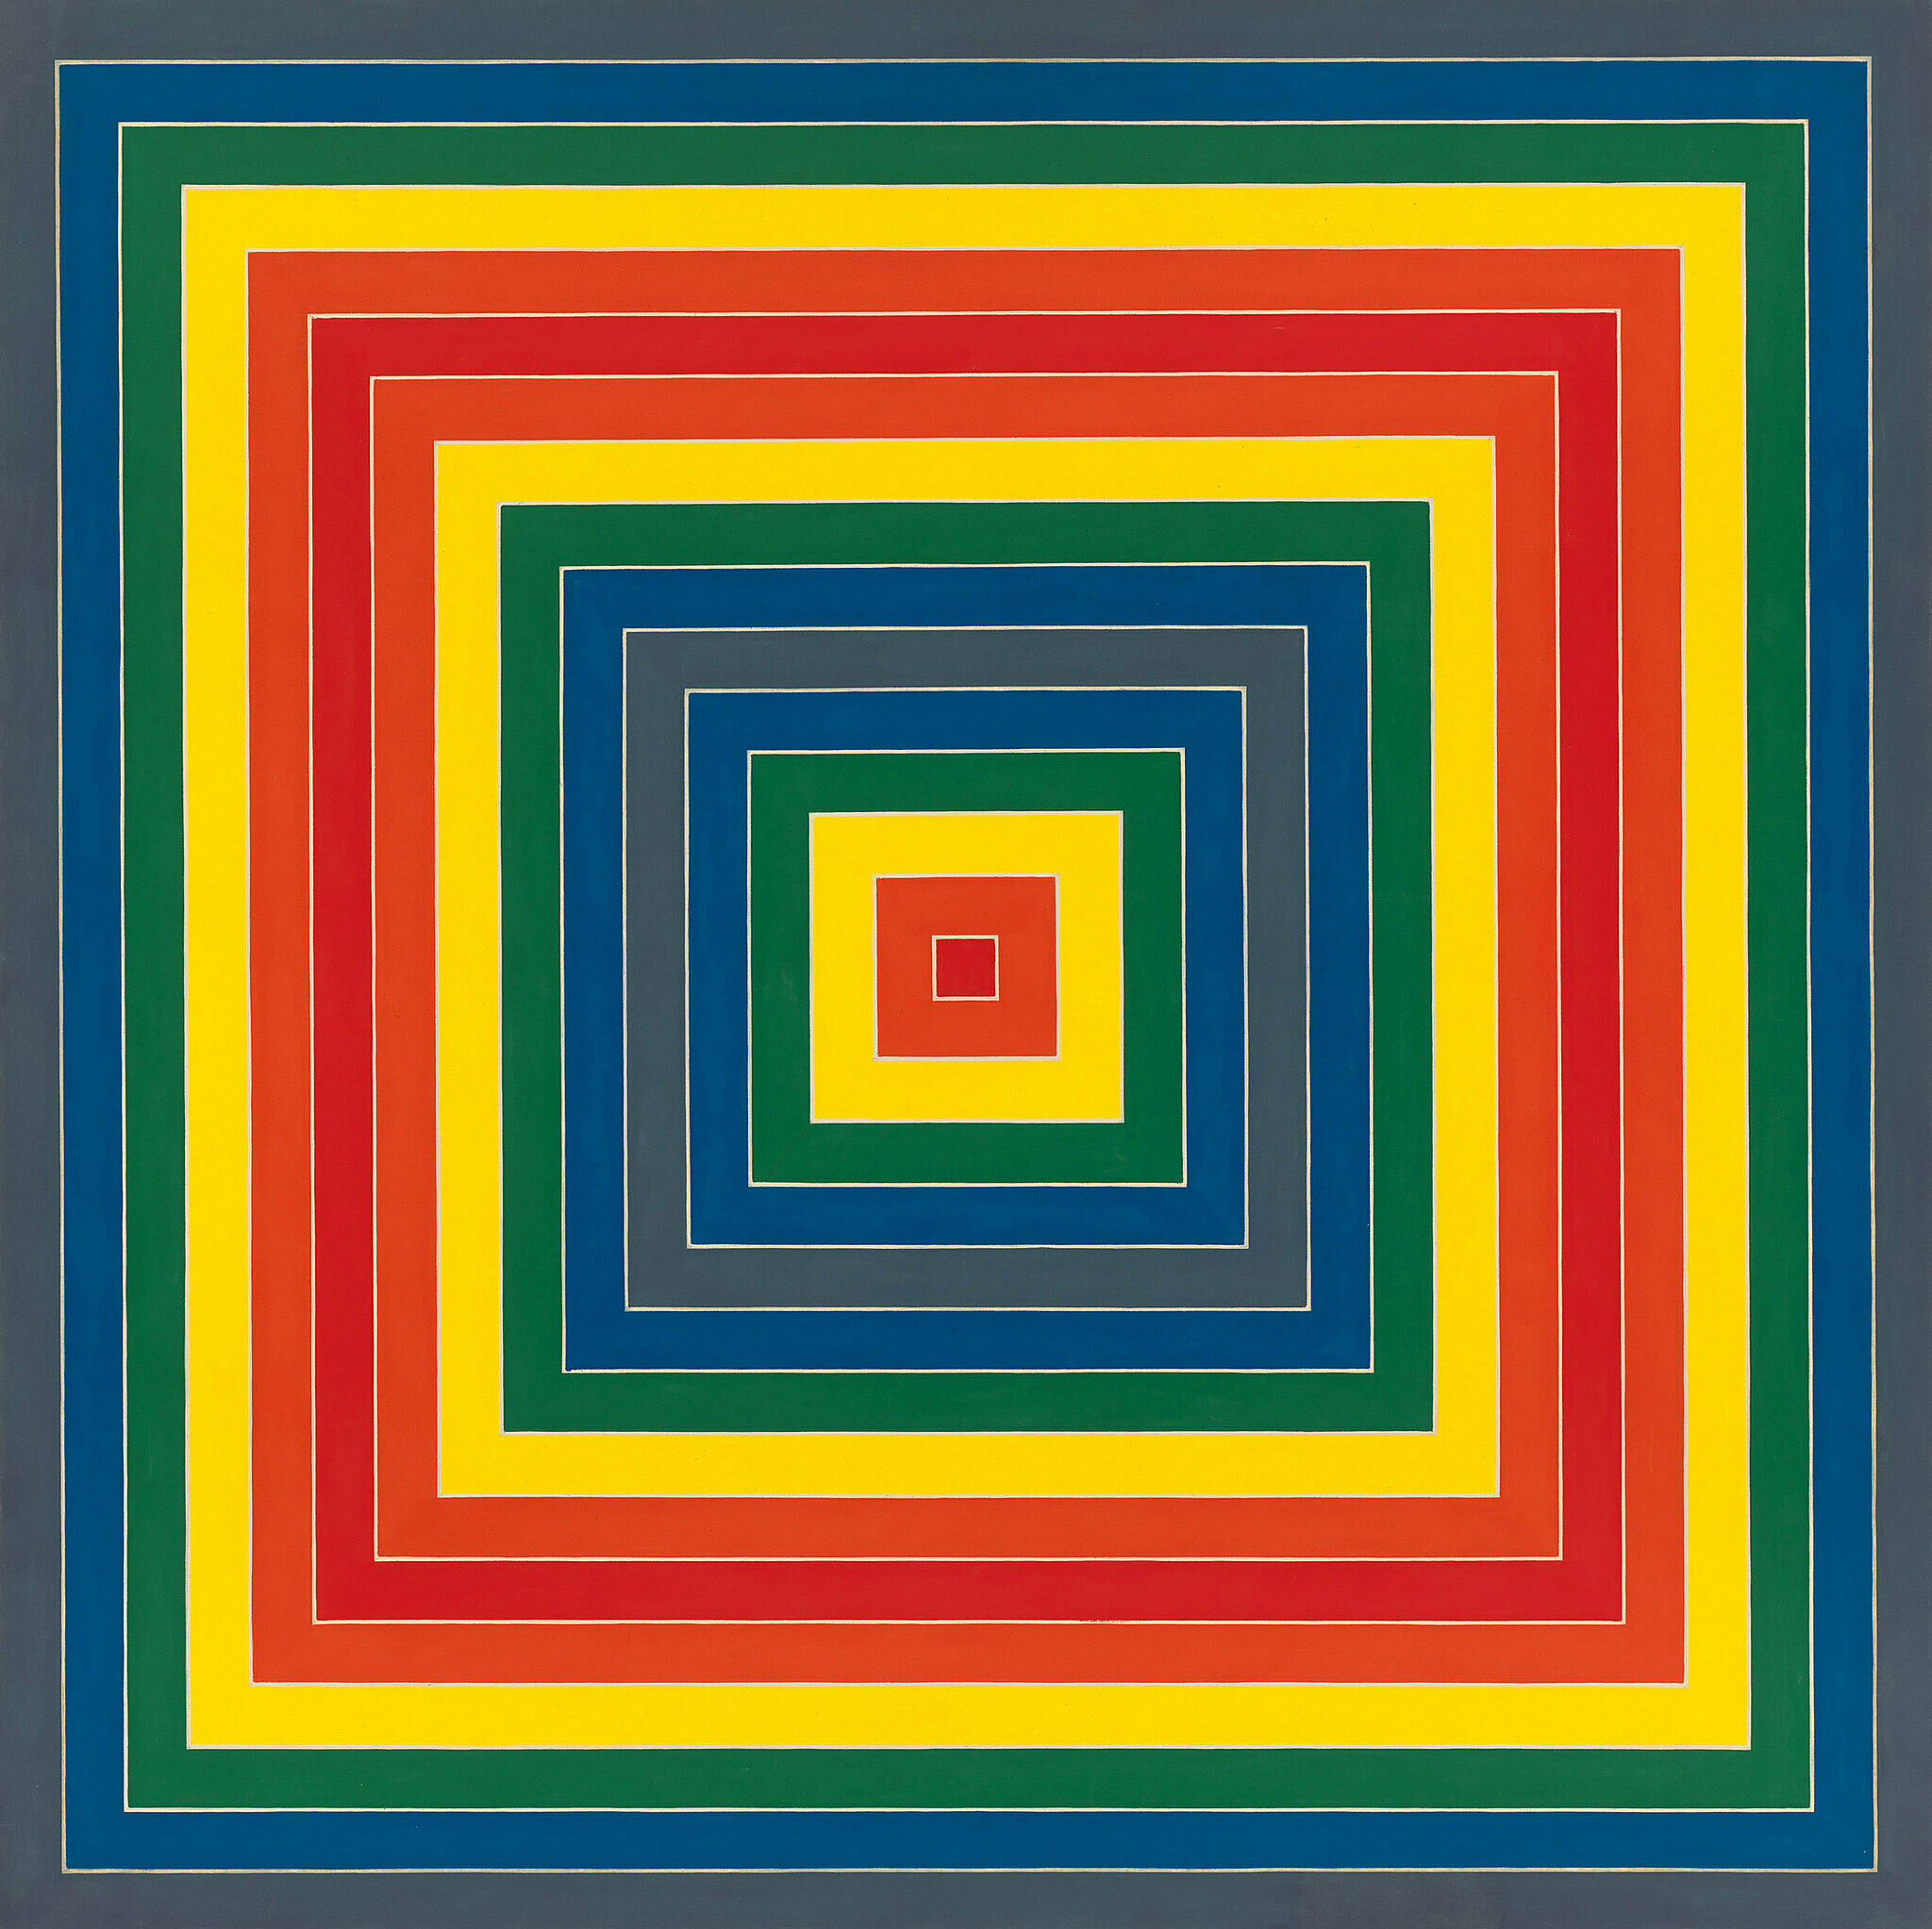 Concentric shrinking squares of color inlaid on each other.